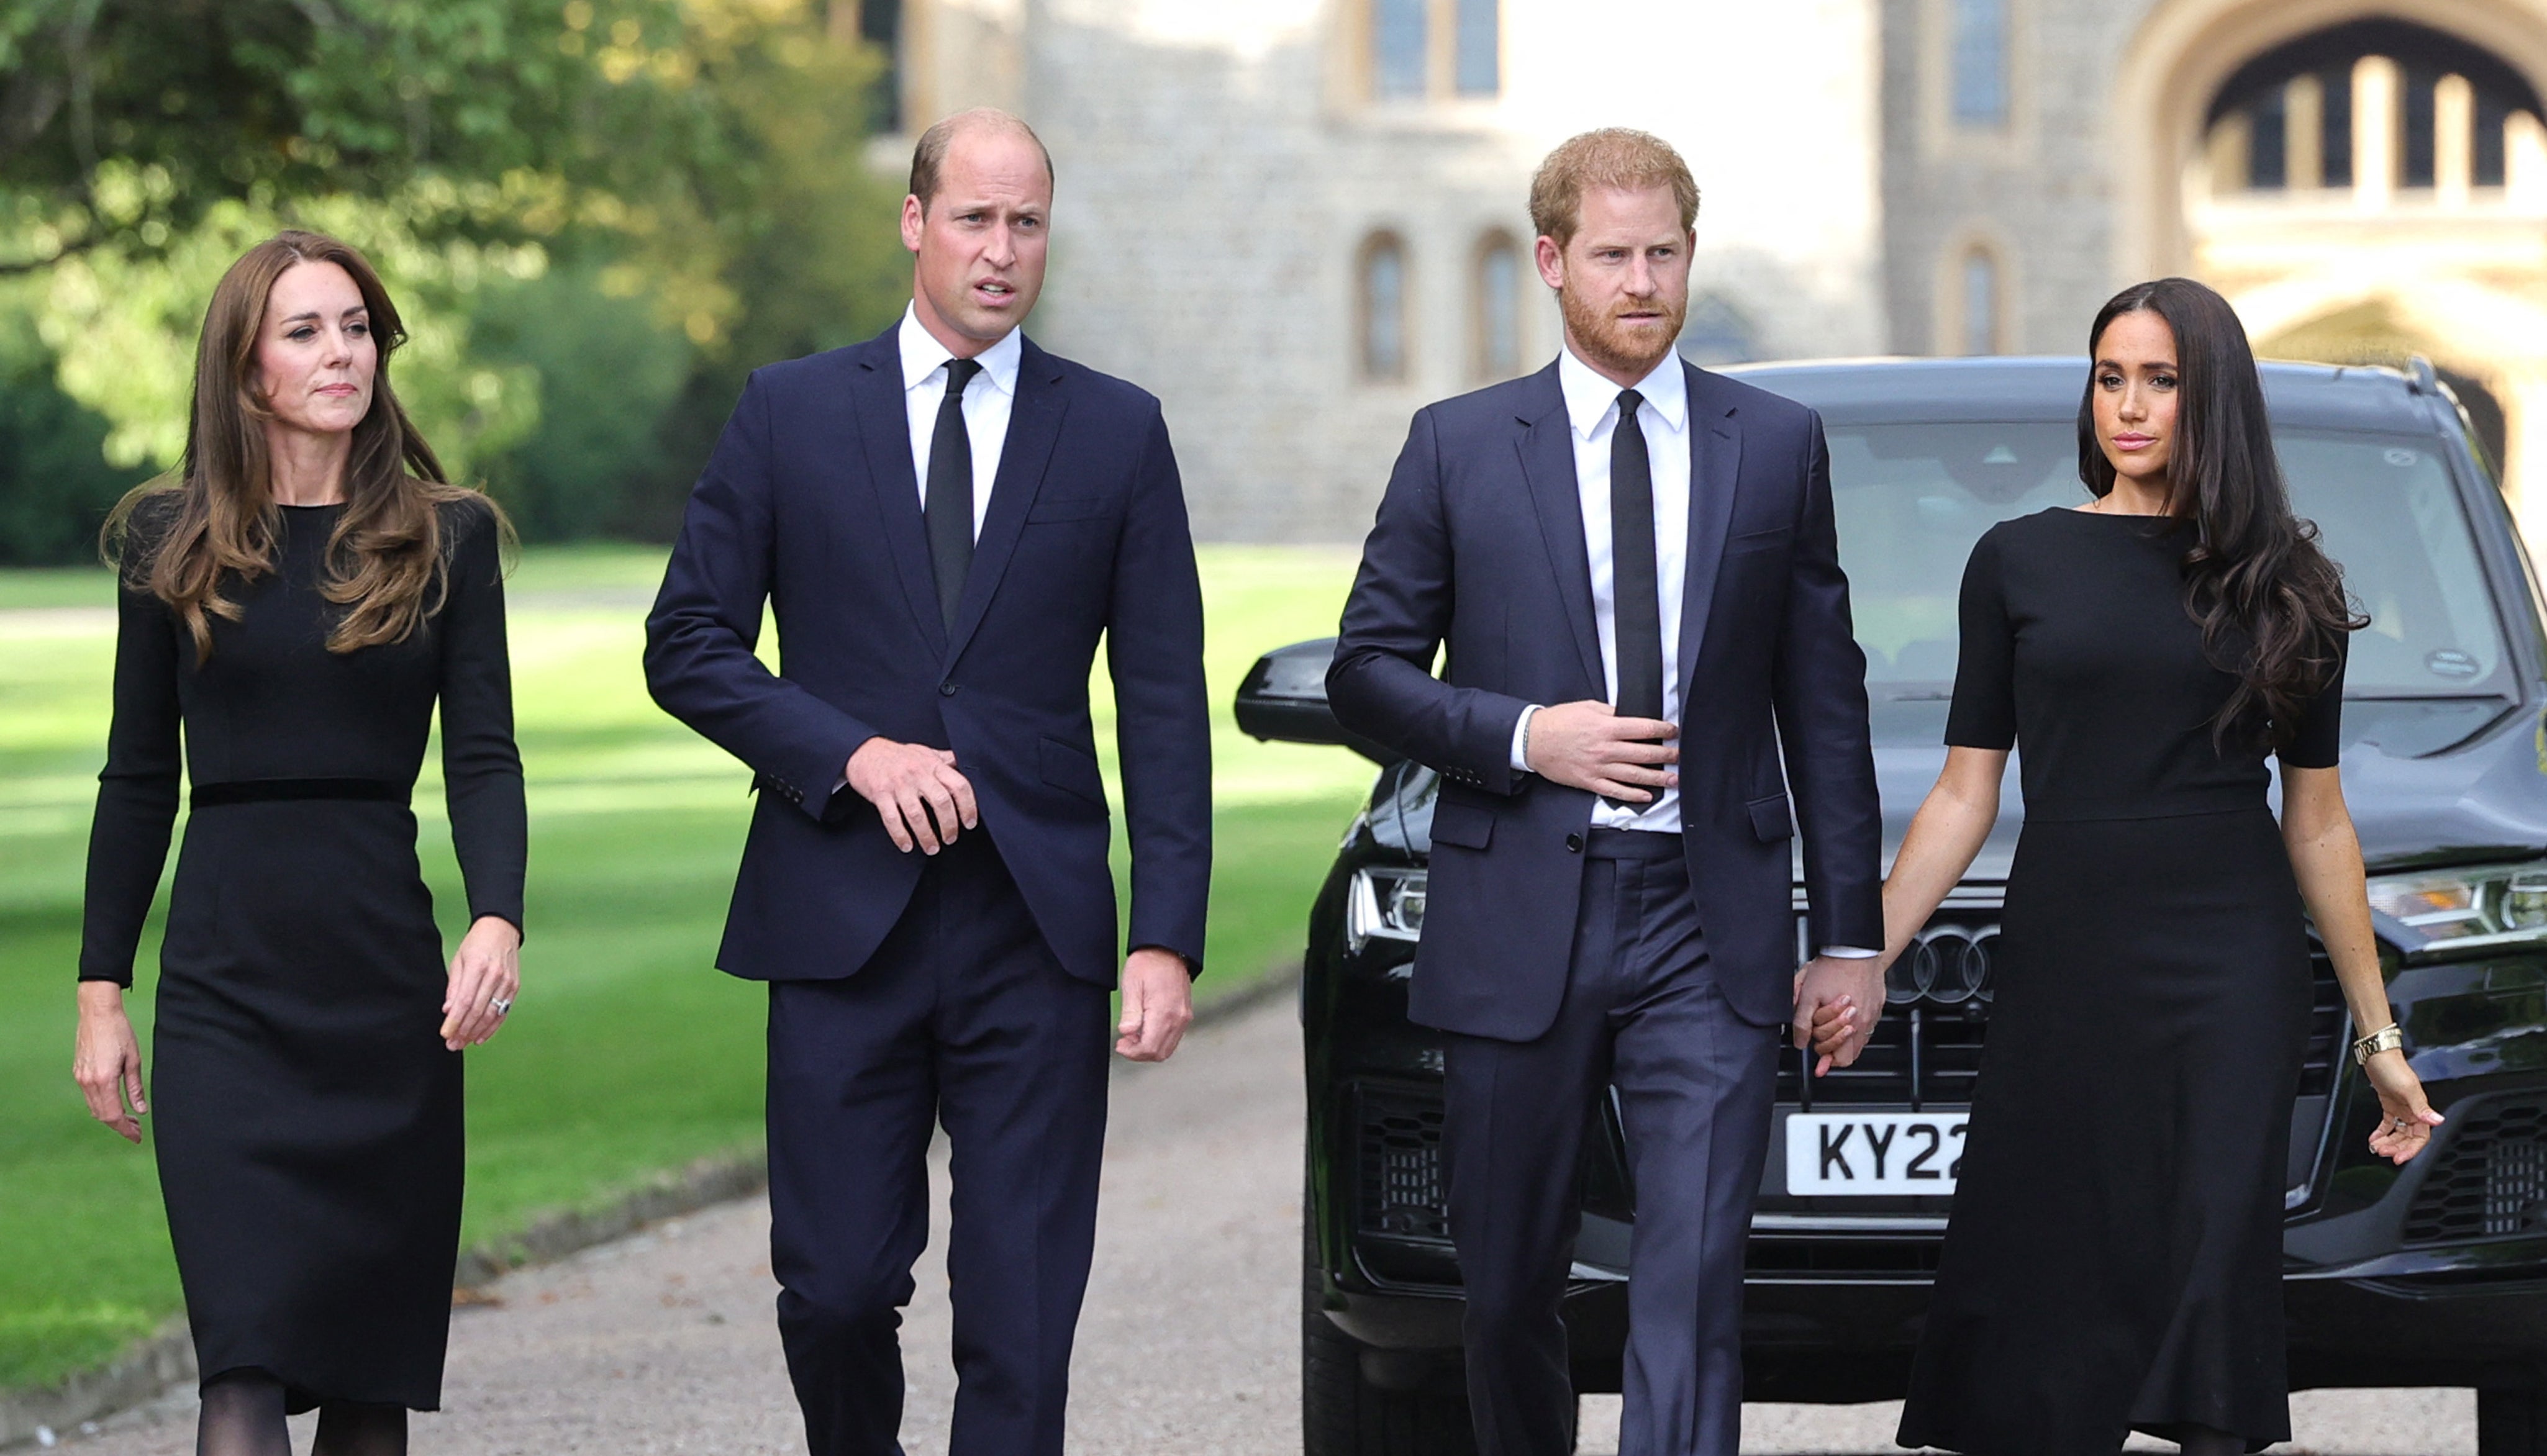 prince william insisted on ‘awkward’ walkabout with harry and meghan after queen’s death